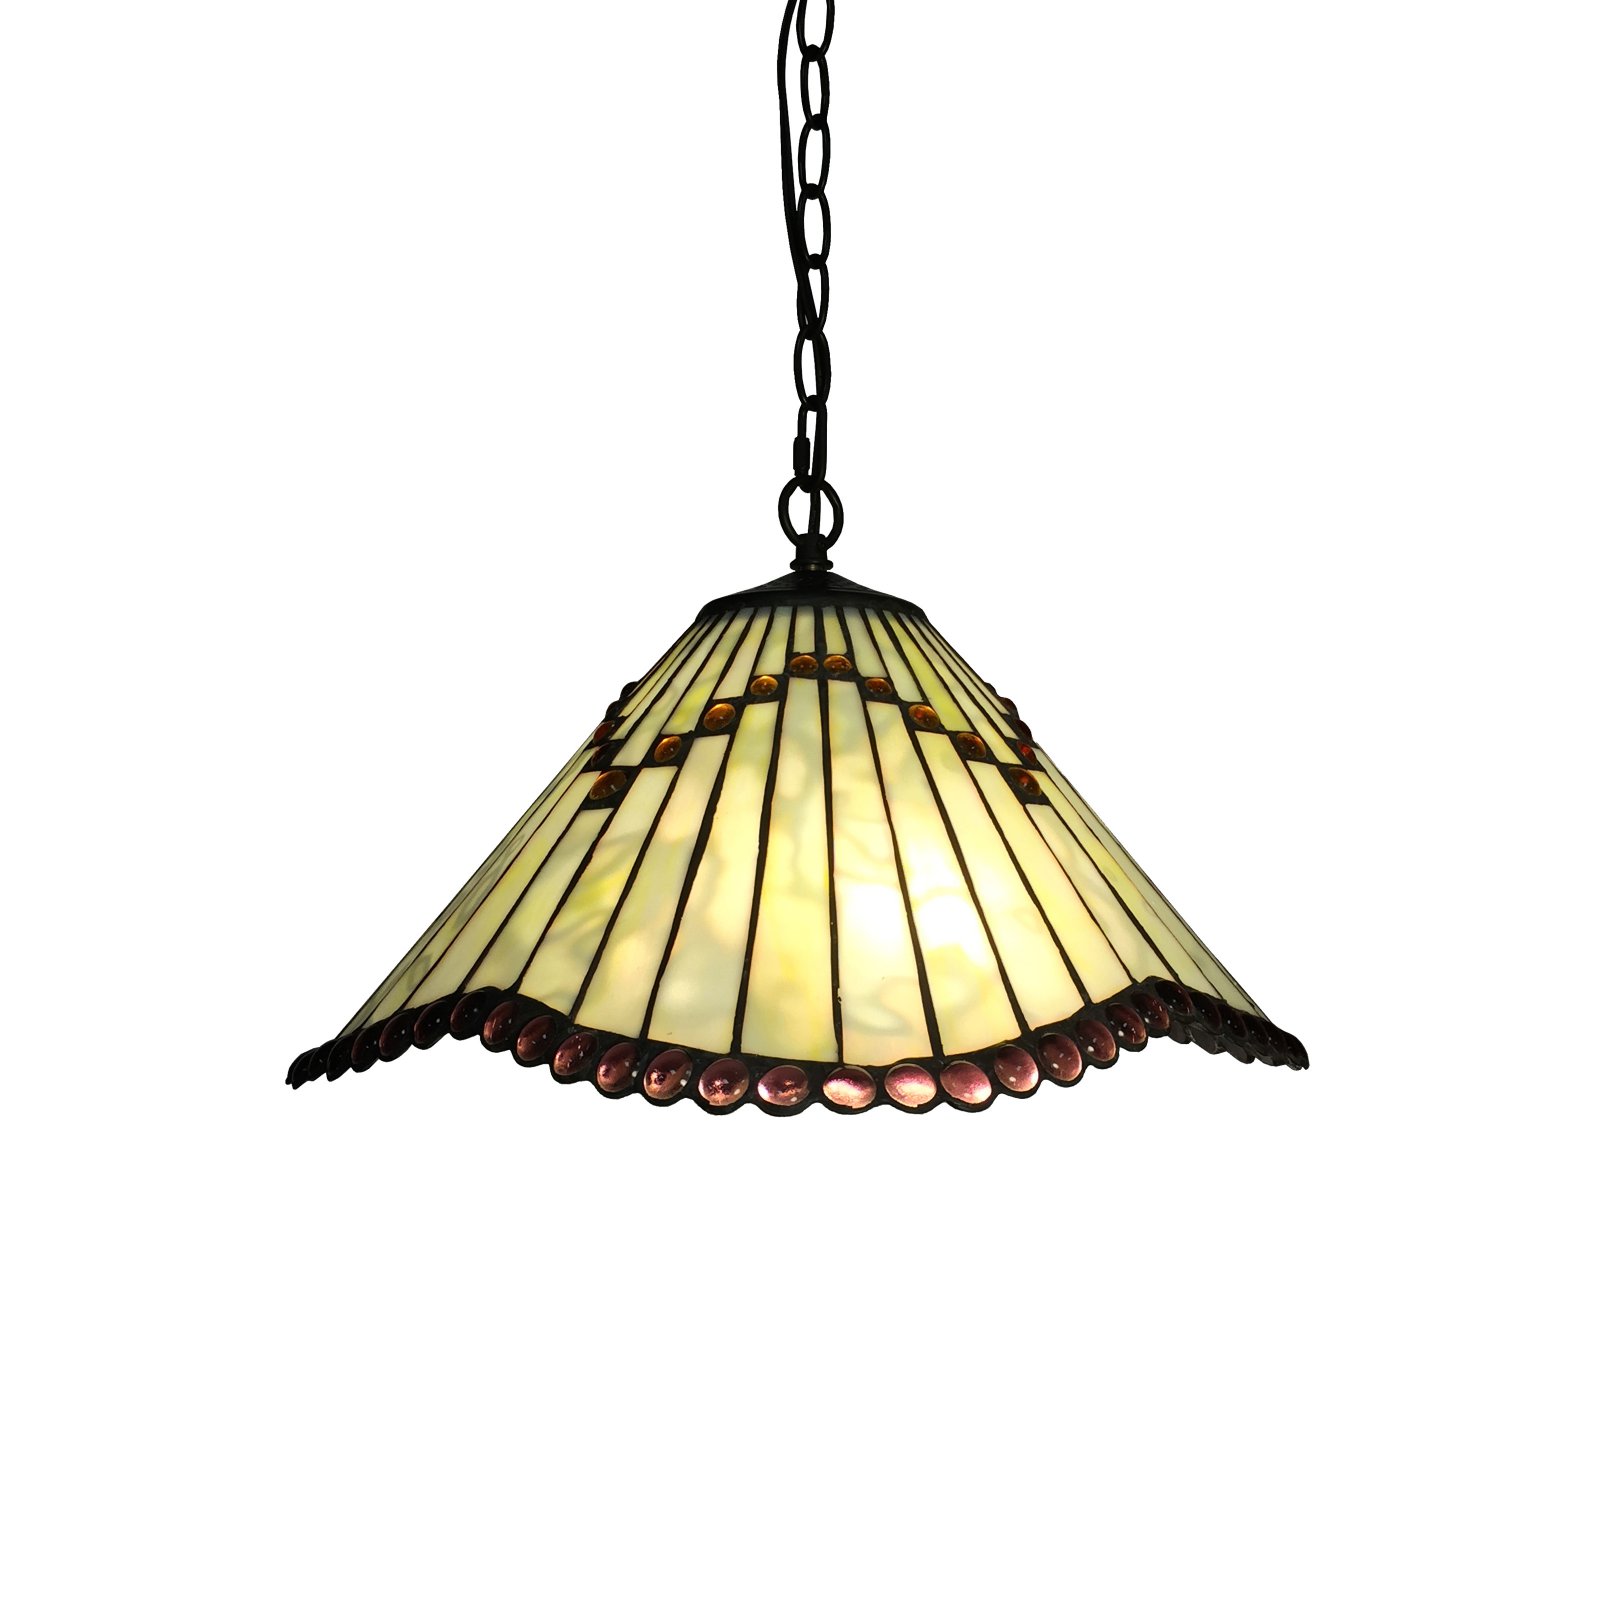 Ahlai 2-light Light Green Tiffany-style 16-inch Hanging Lamp - image 1 of 2